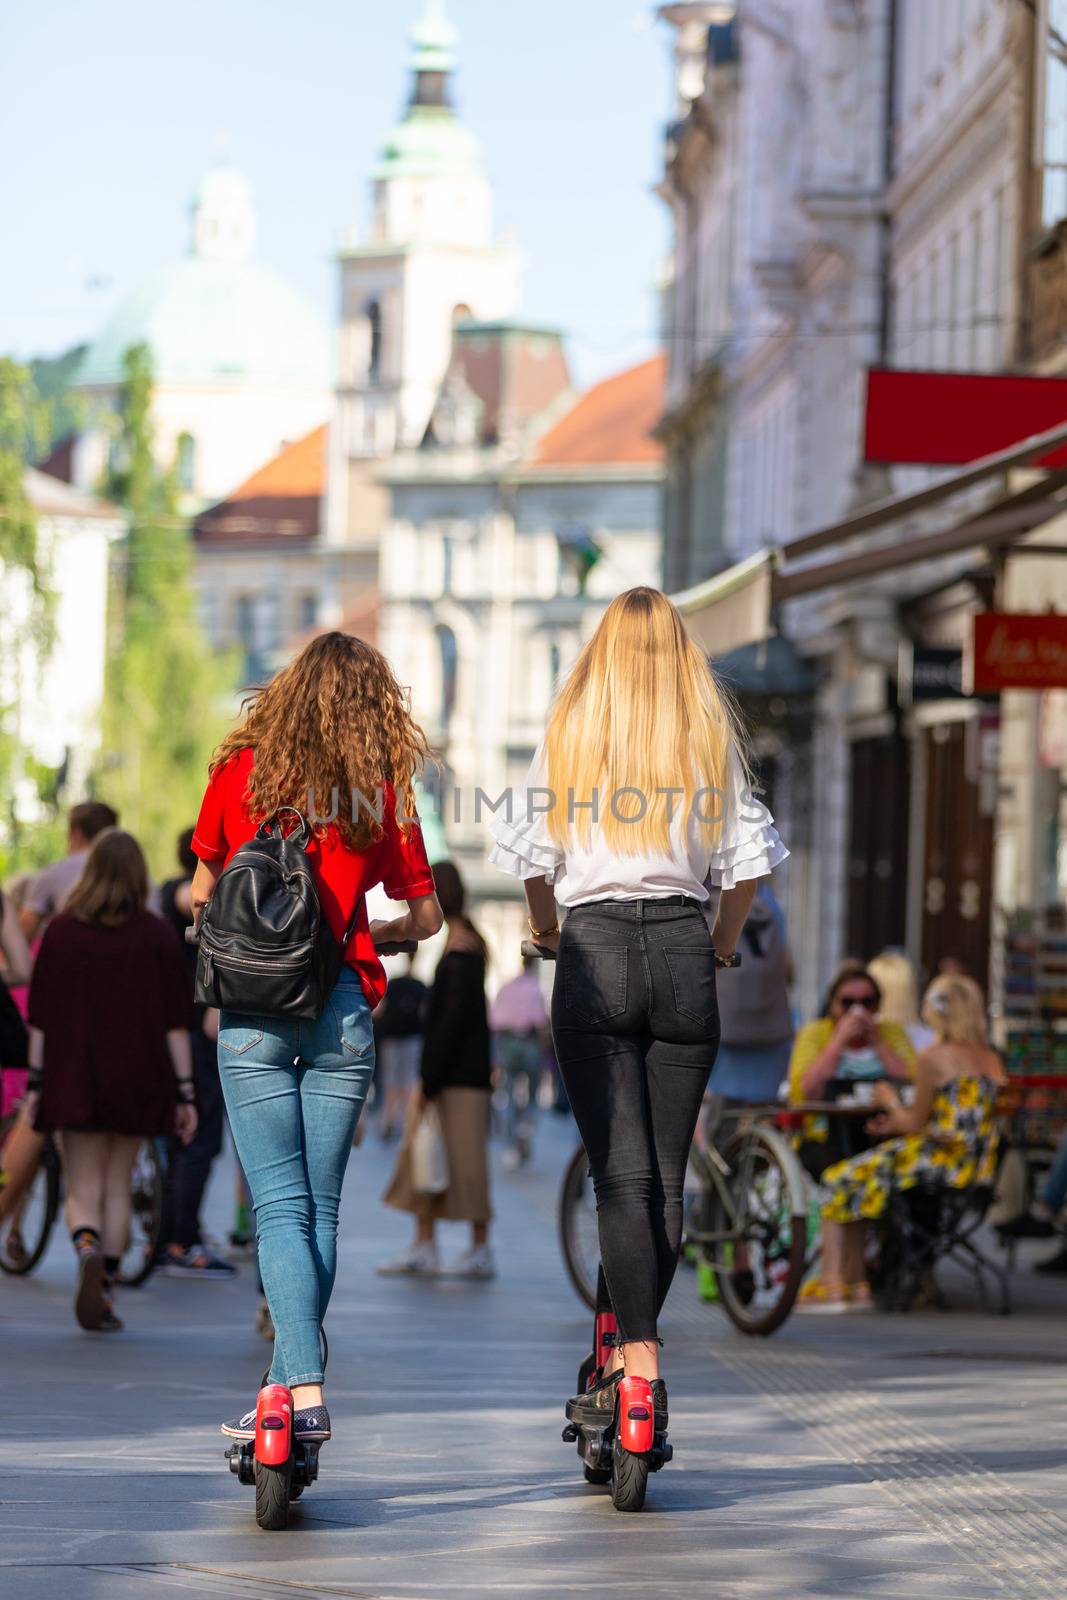 Rear view of trendy fashinable teenager girls riding public rental electric scooters in urban city environment. New eco-friendly modern public city transport in Ljubljana, Slovenia by kasto